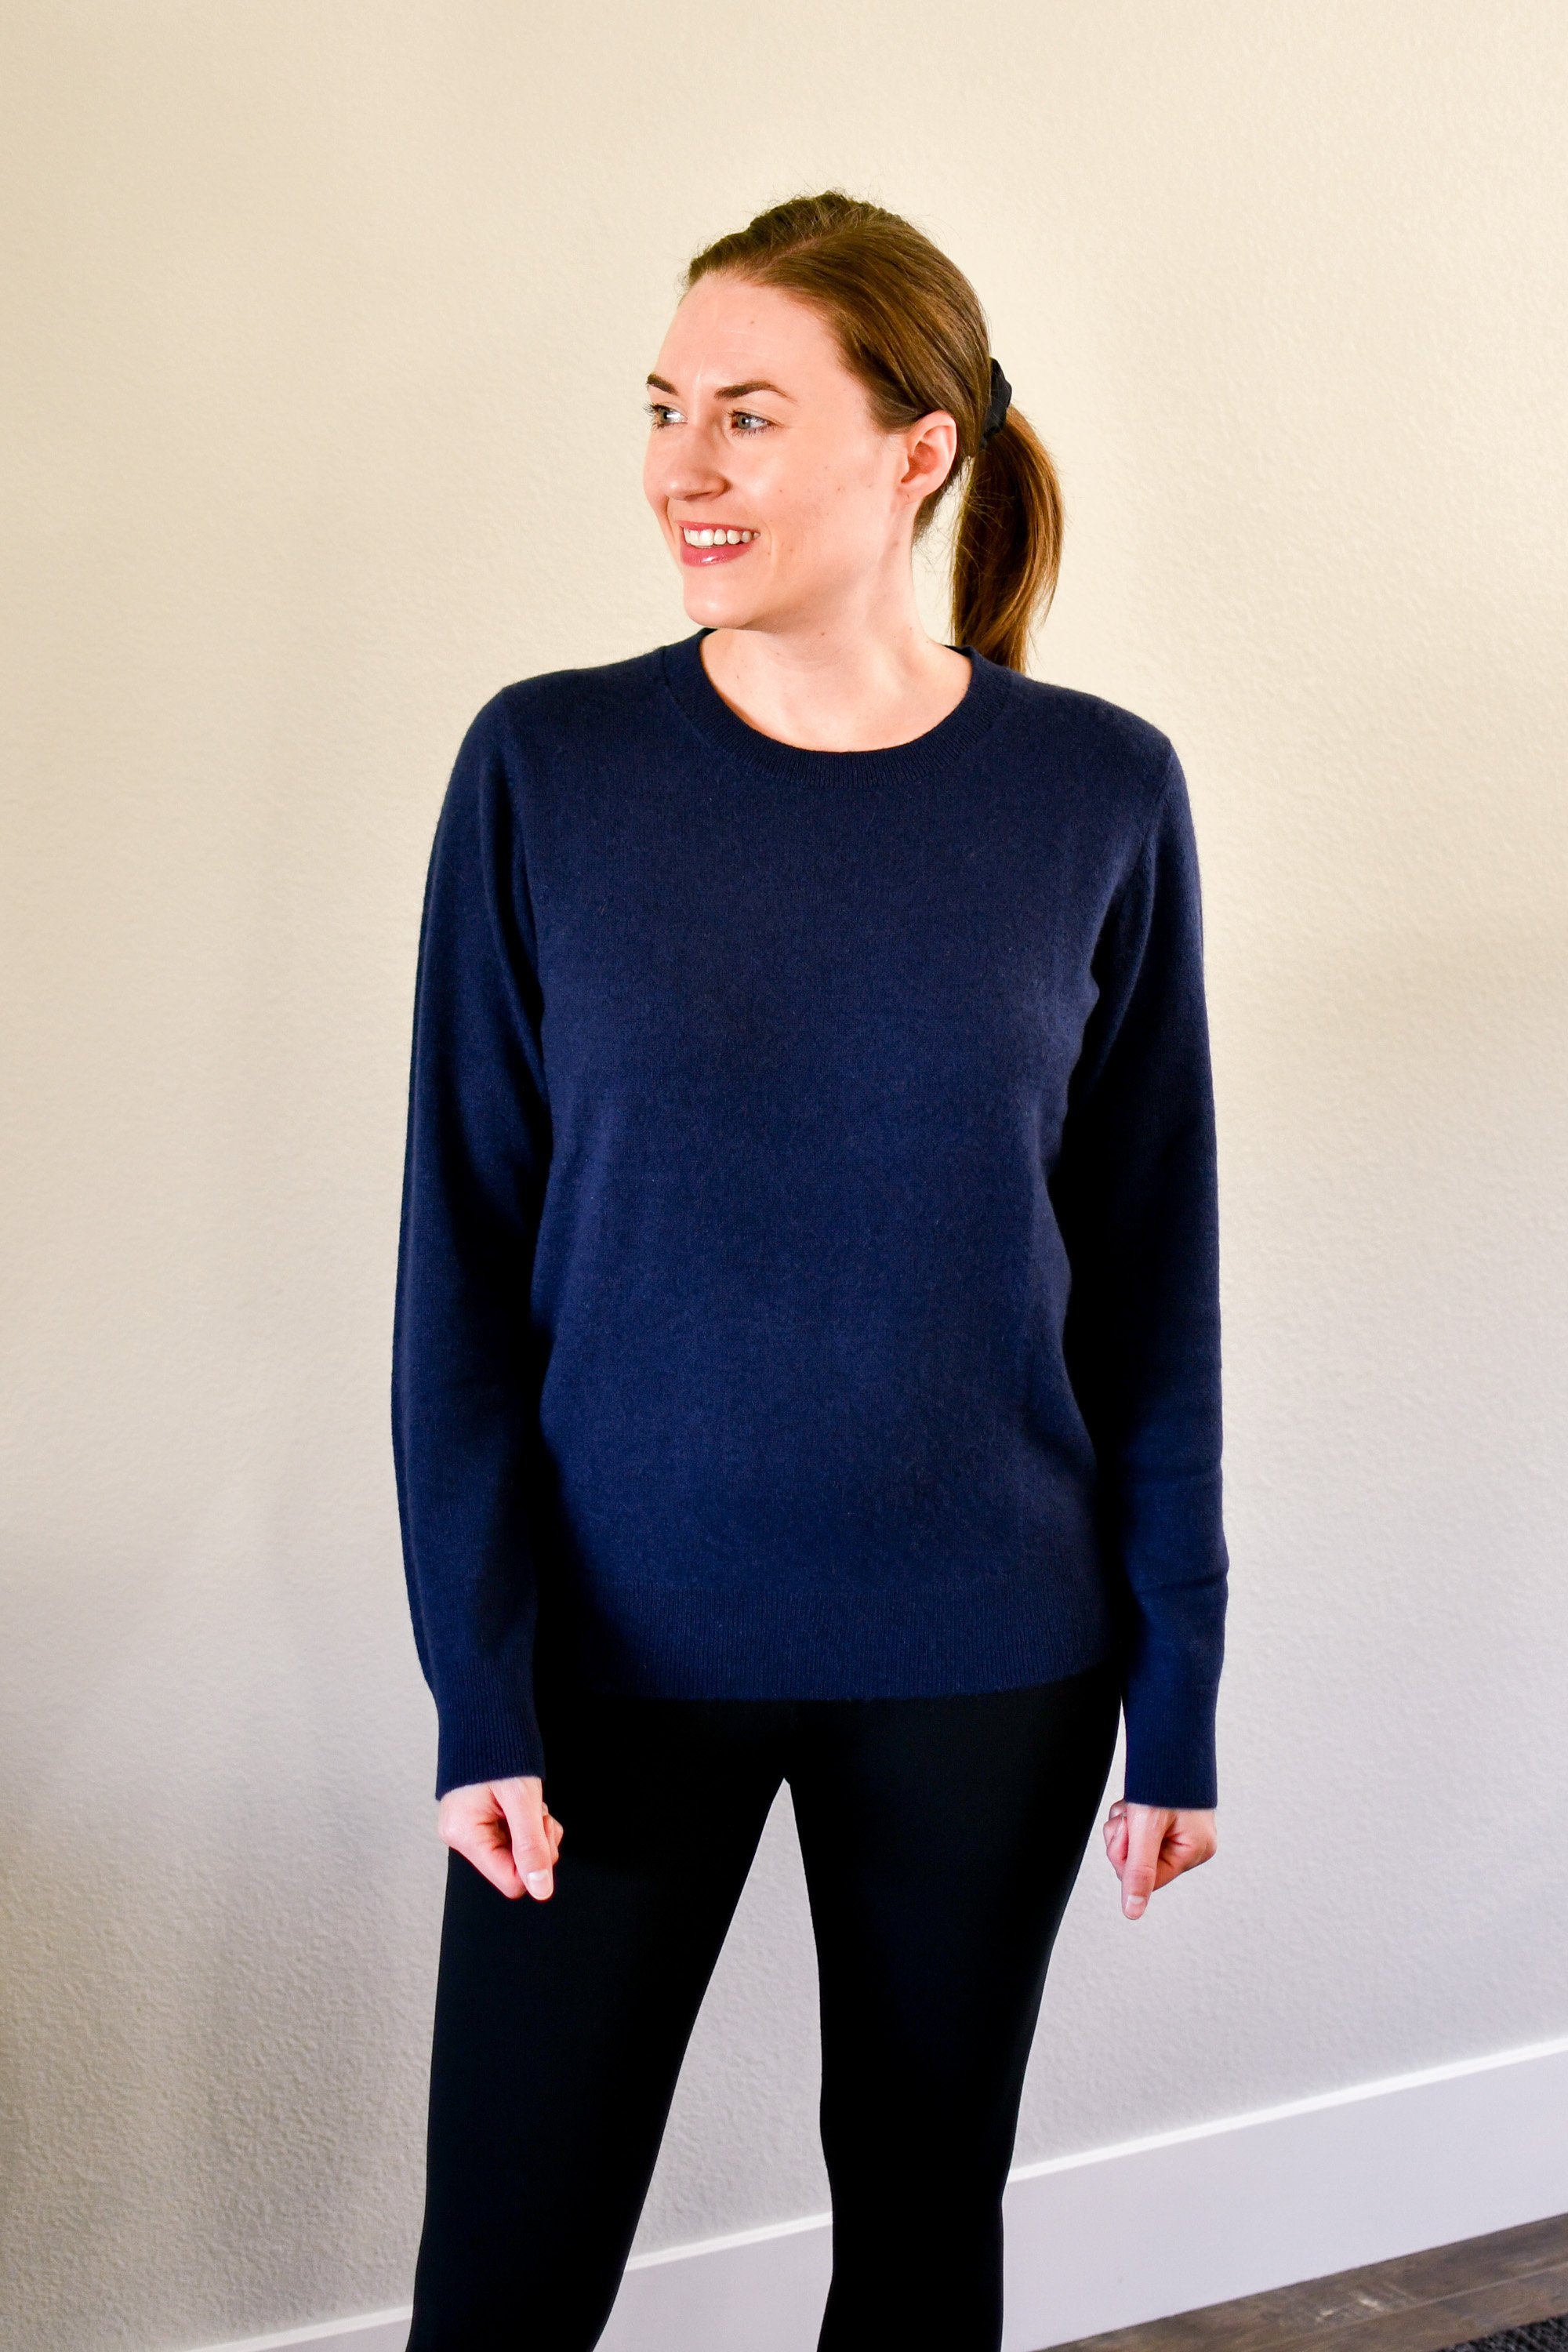 Which is the Best Cashmere Sweater? Quince, Naadam, Everlane